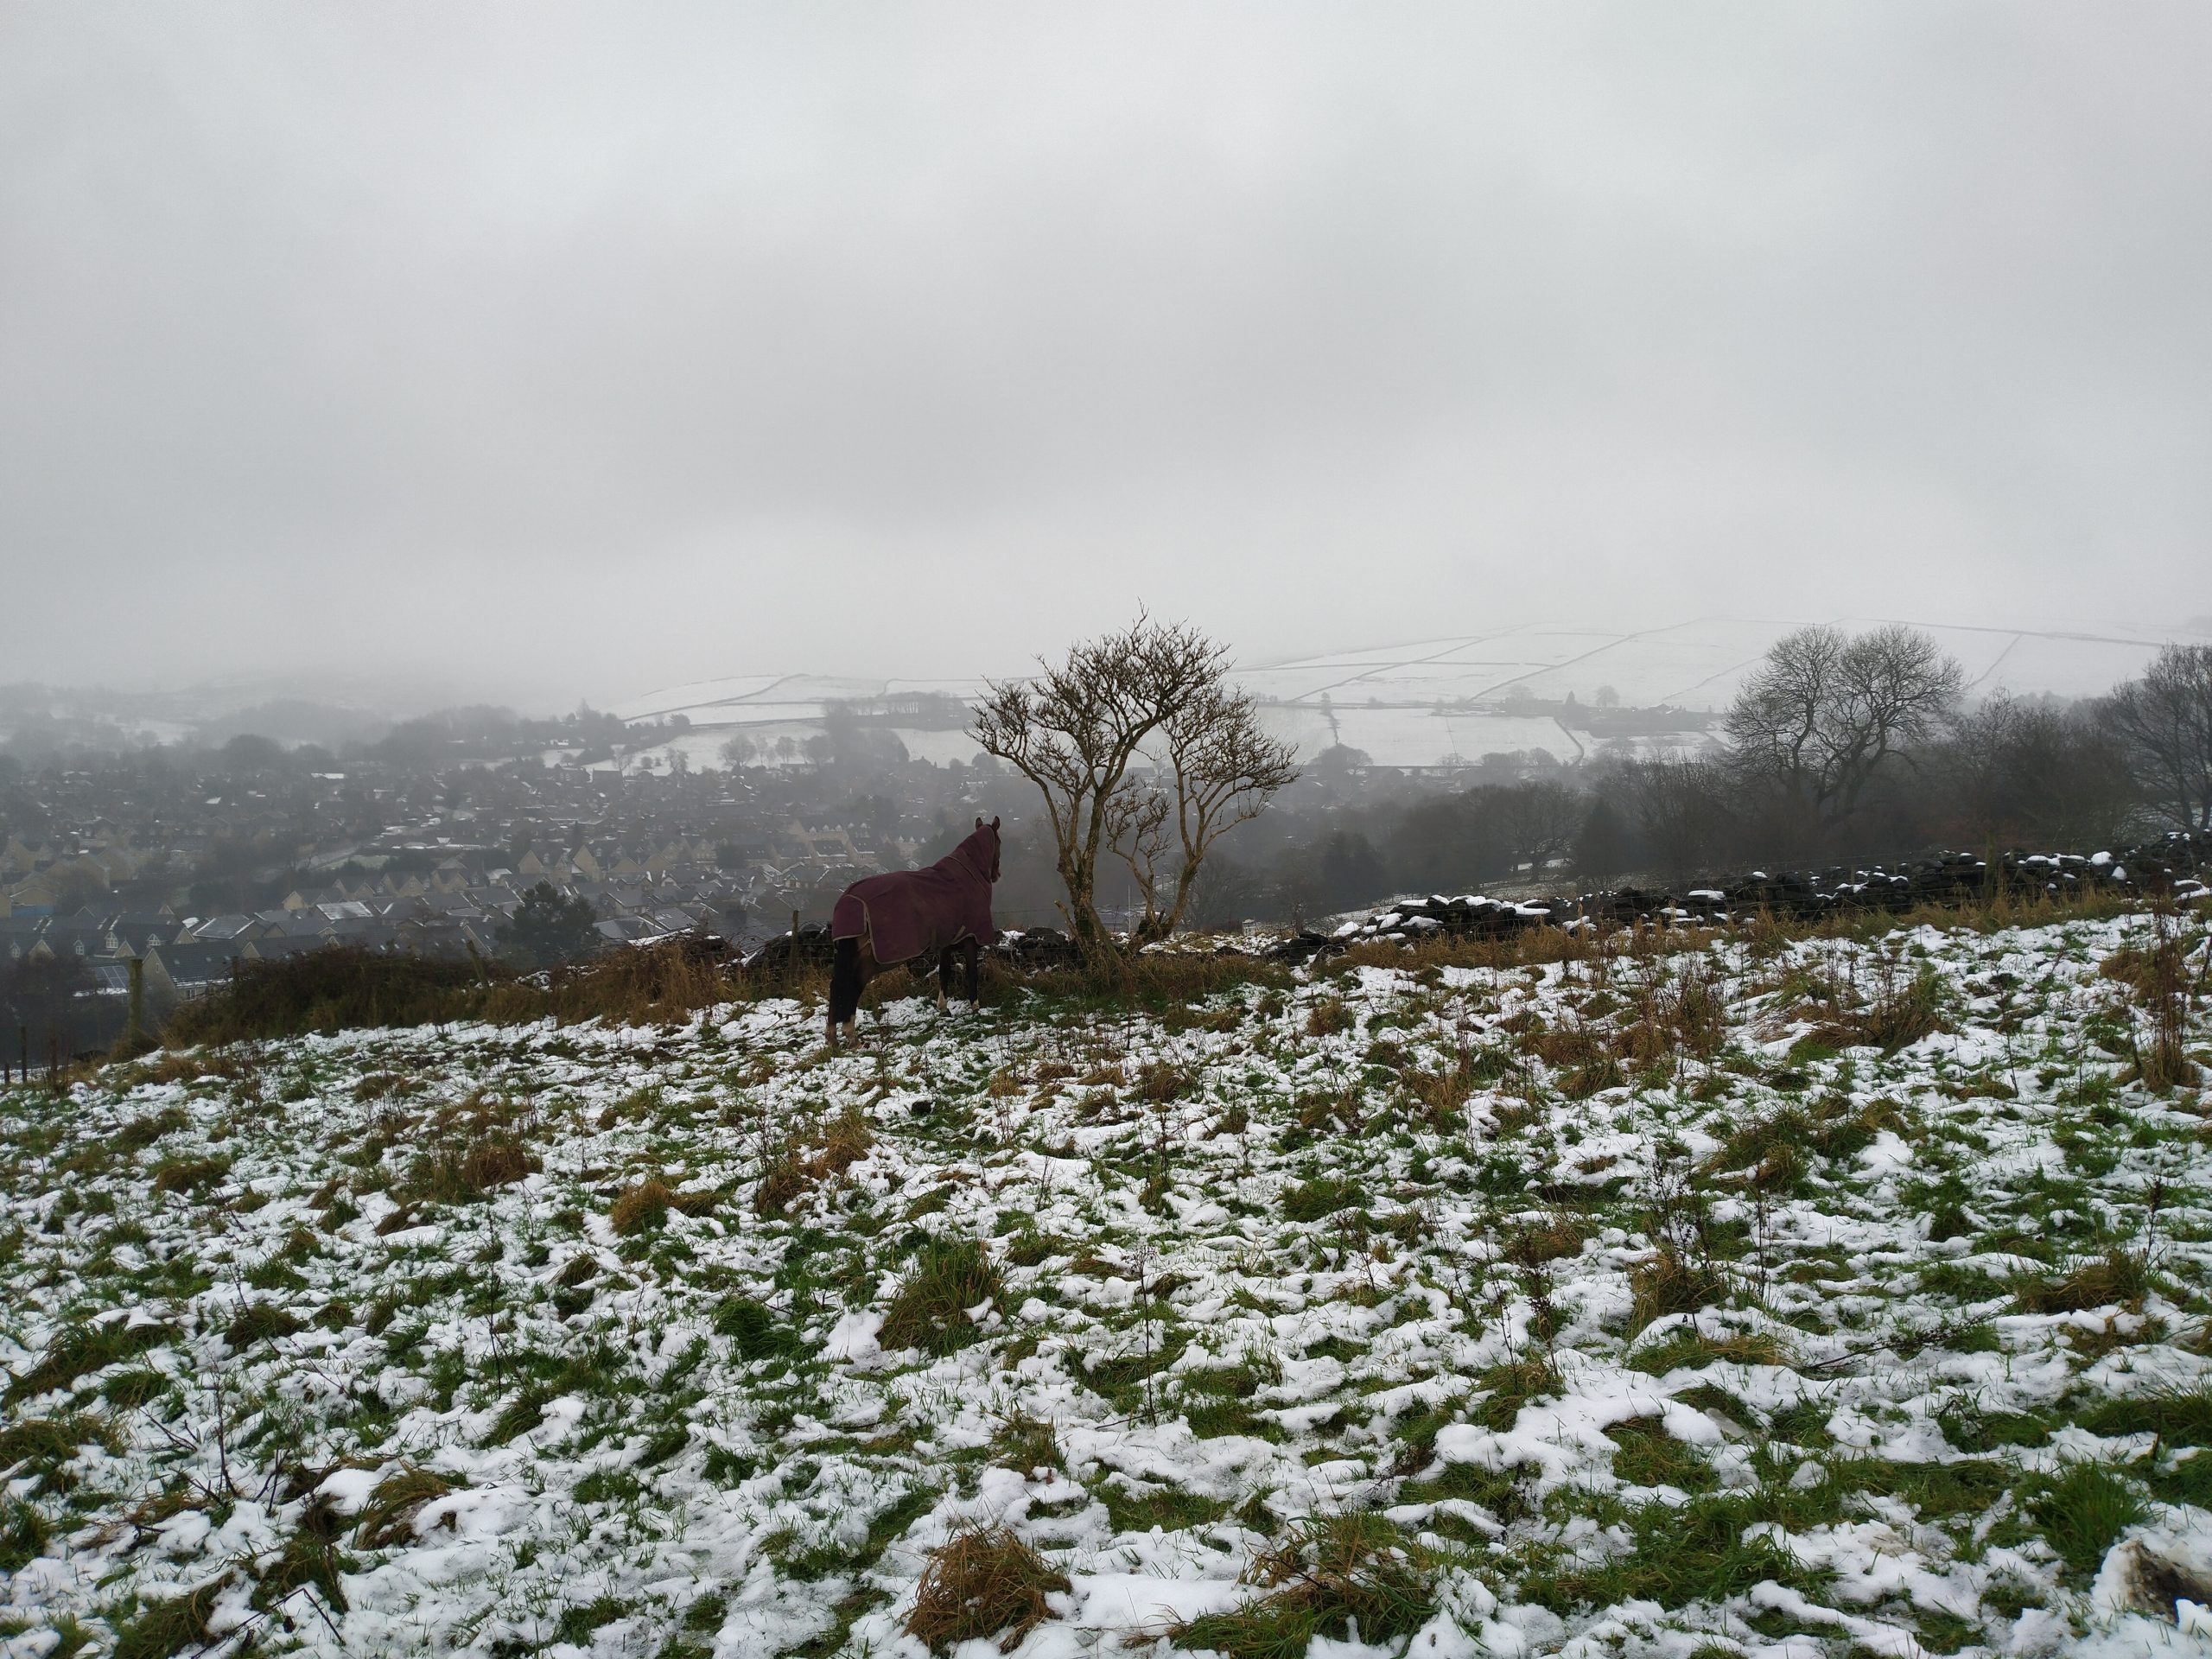 A horse on the hill near our house